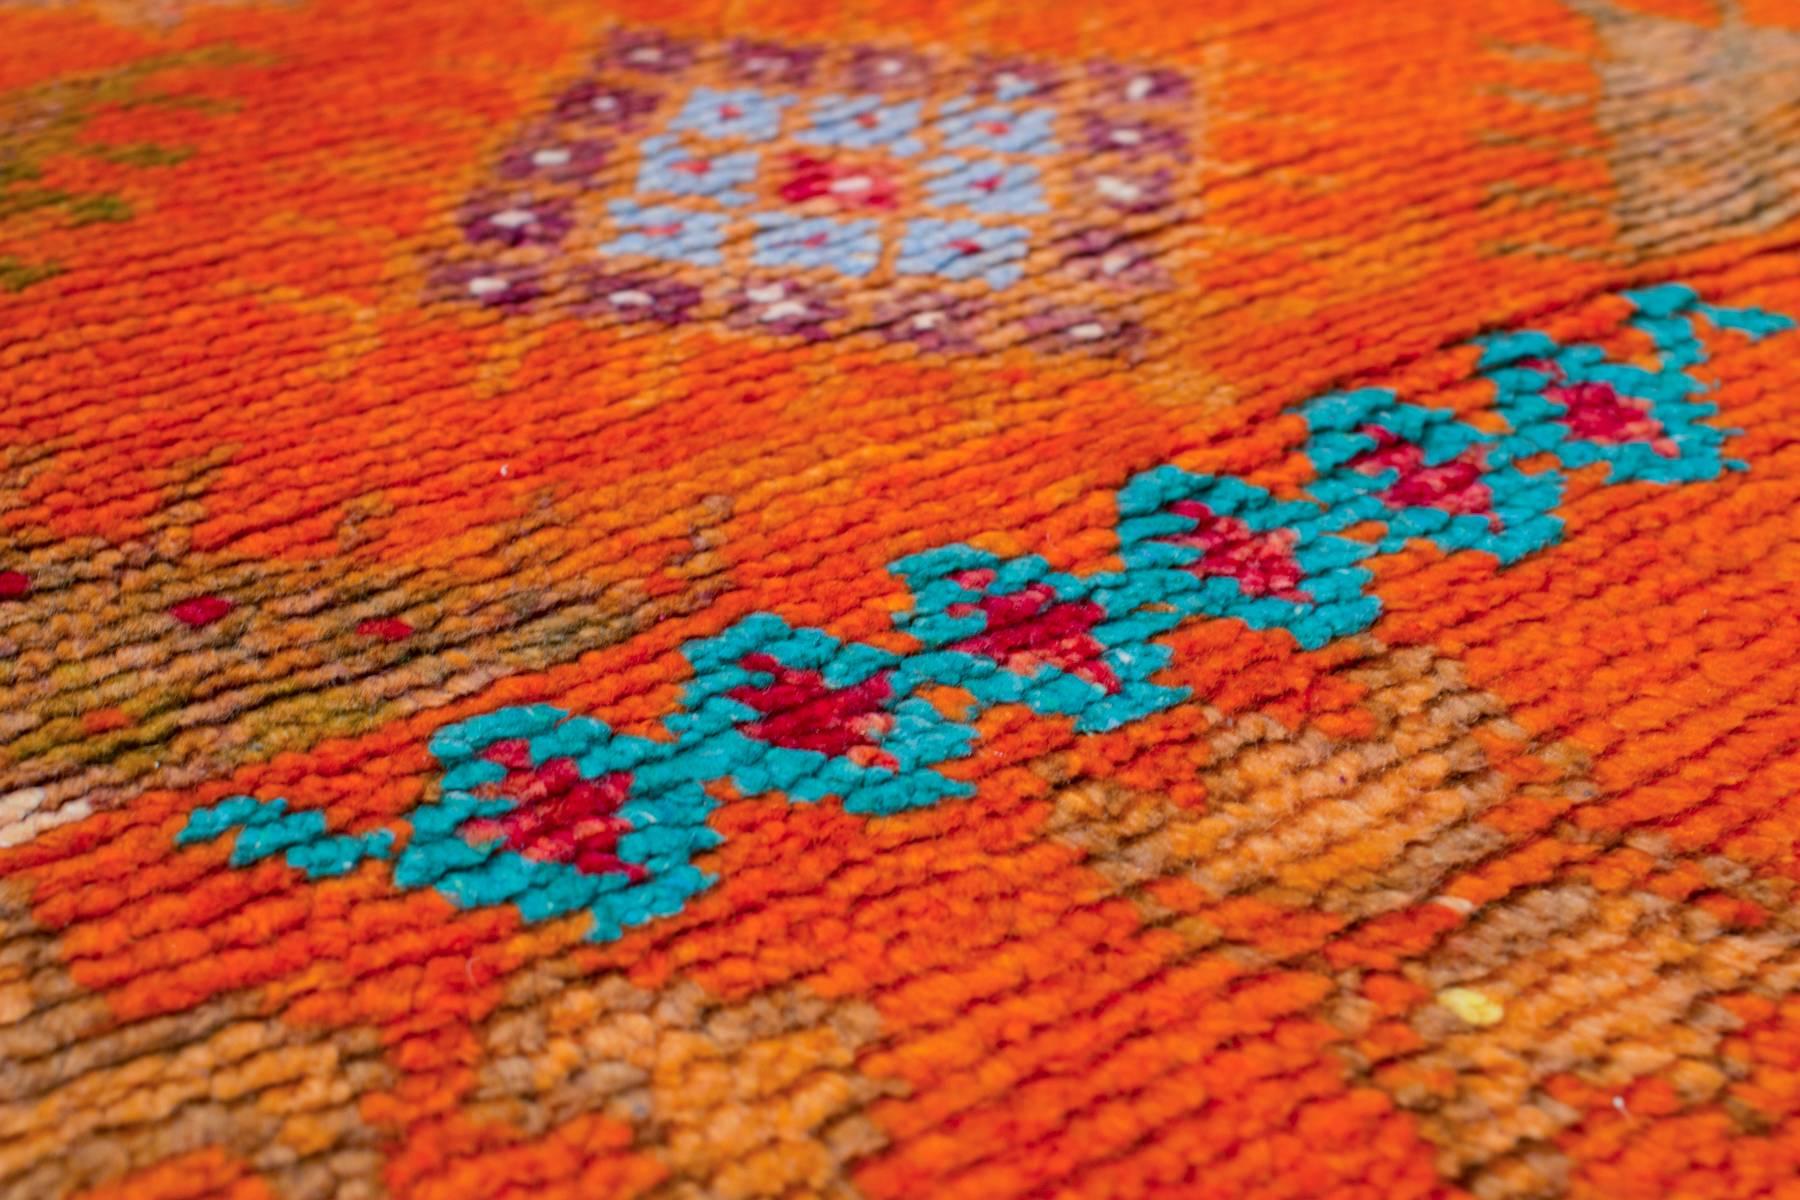 This bright and energetic orange and red vintage Moroccan rug has a short pile and is adorned with beautiful jewel-toned colors. This rug has a border that continues to showcase the representative symbols and design elements throughout. The blue